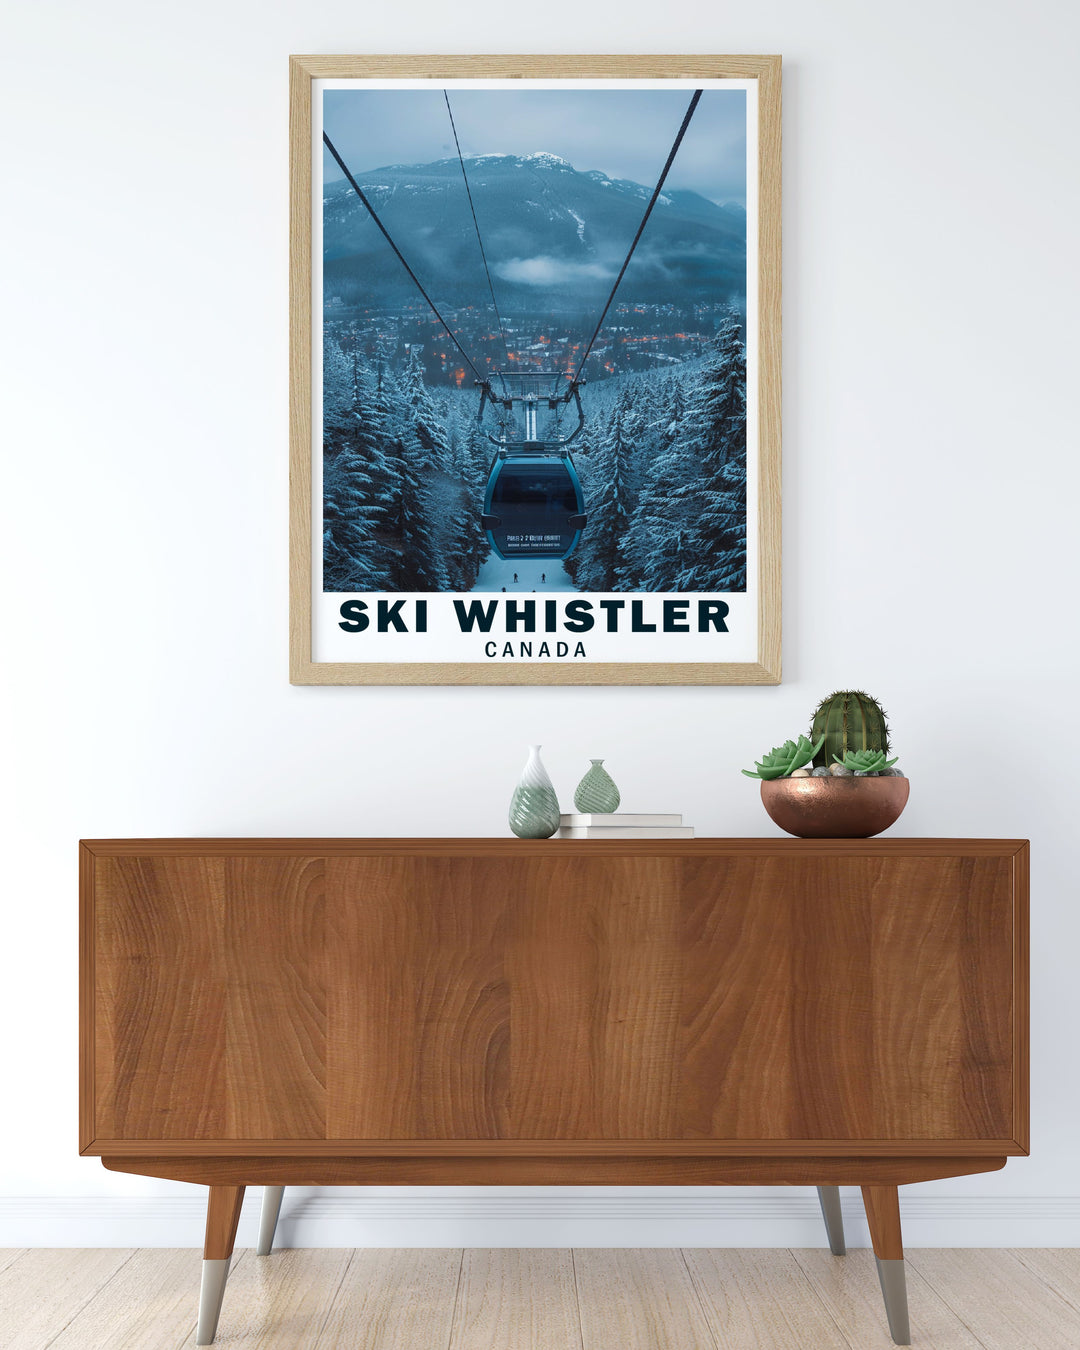 Featuring the iconic Whistler Blackcomb, this poster celebrates the expansive ski terrain and vibrant village life, inviting viewers to explore one of North Americas premier ski destinations.